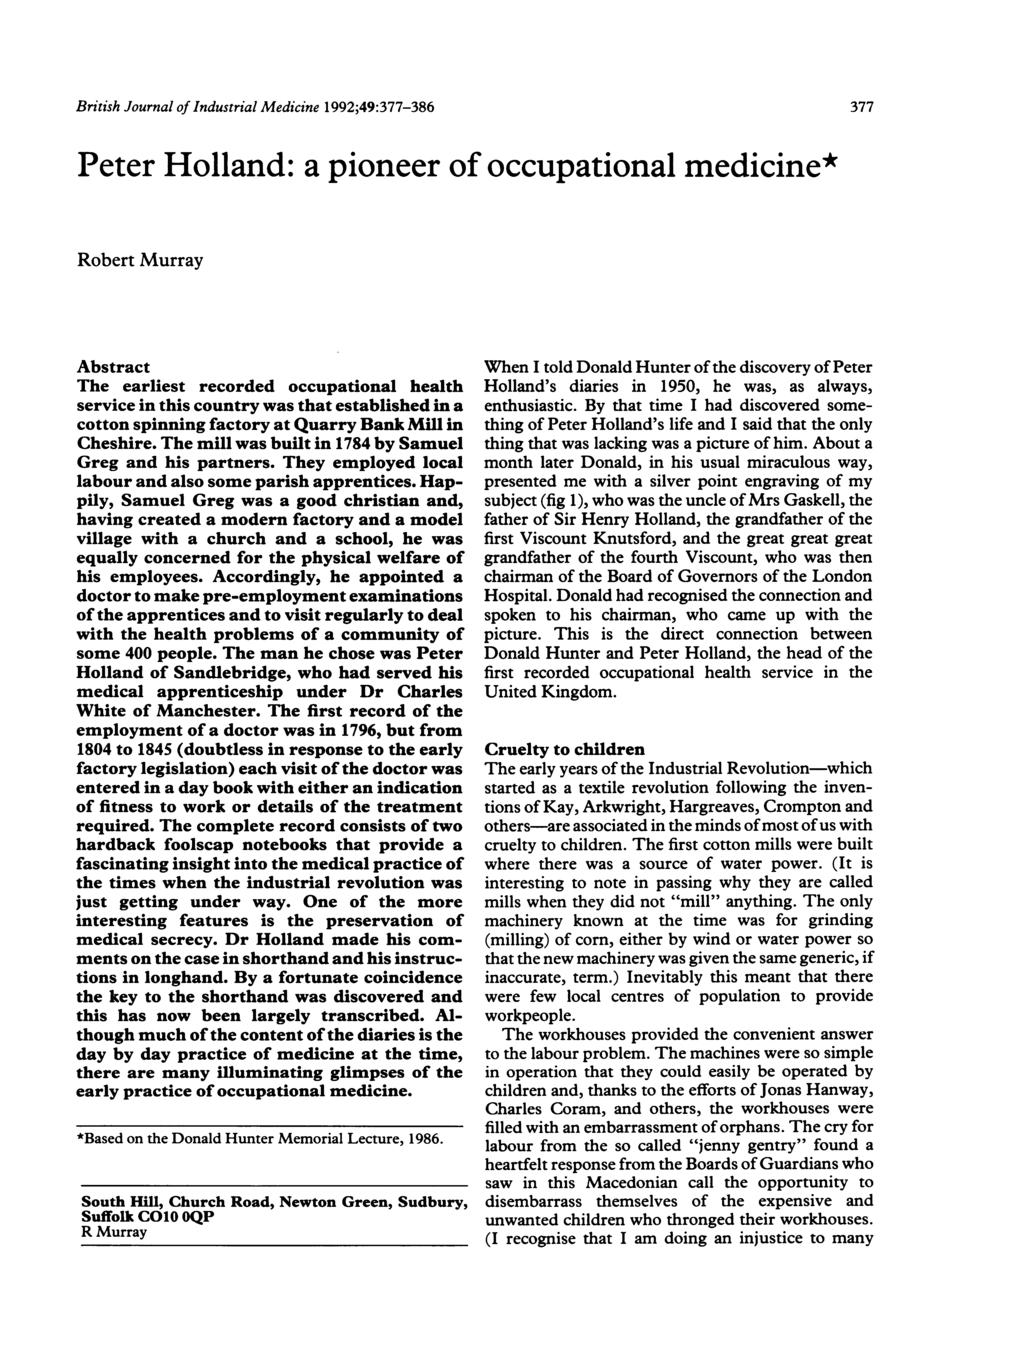 British Journal of Industrial Medicine 1992;49:377-386 Peter Holland: a pioneer of occupational medicine* Robert Murray Abstract The earliest recorded occupational health service in this country was